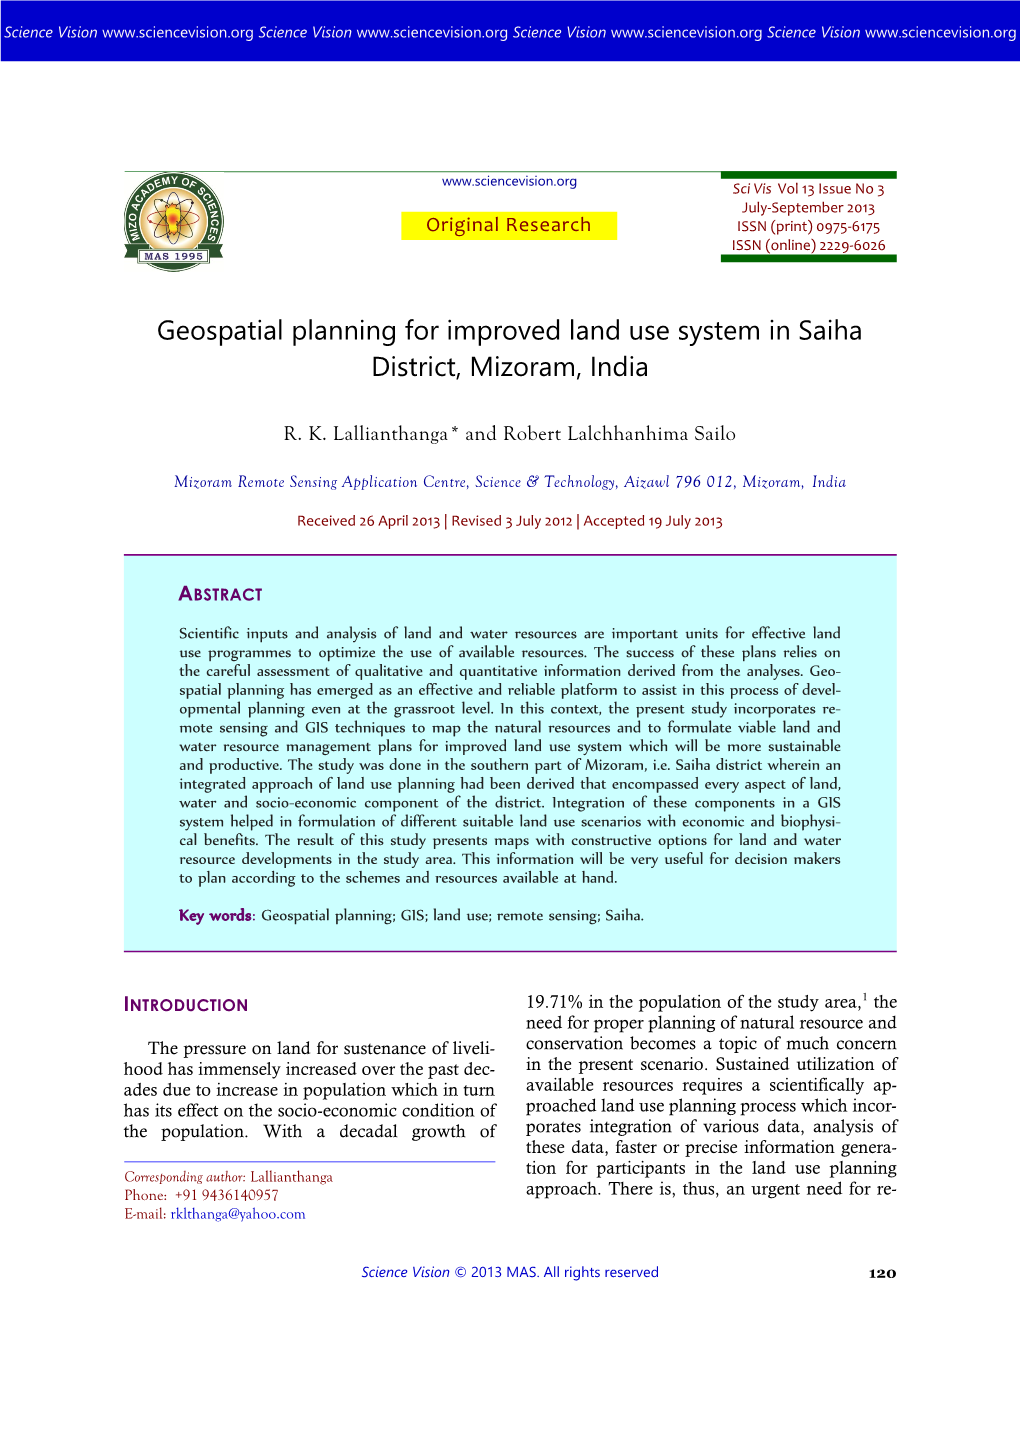 Geospatial Planning for Improved Land Use System in Saiha District, Mizoram, India